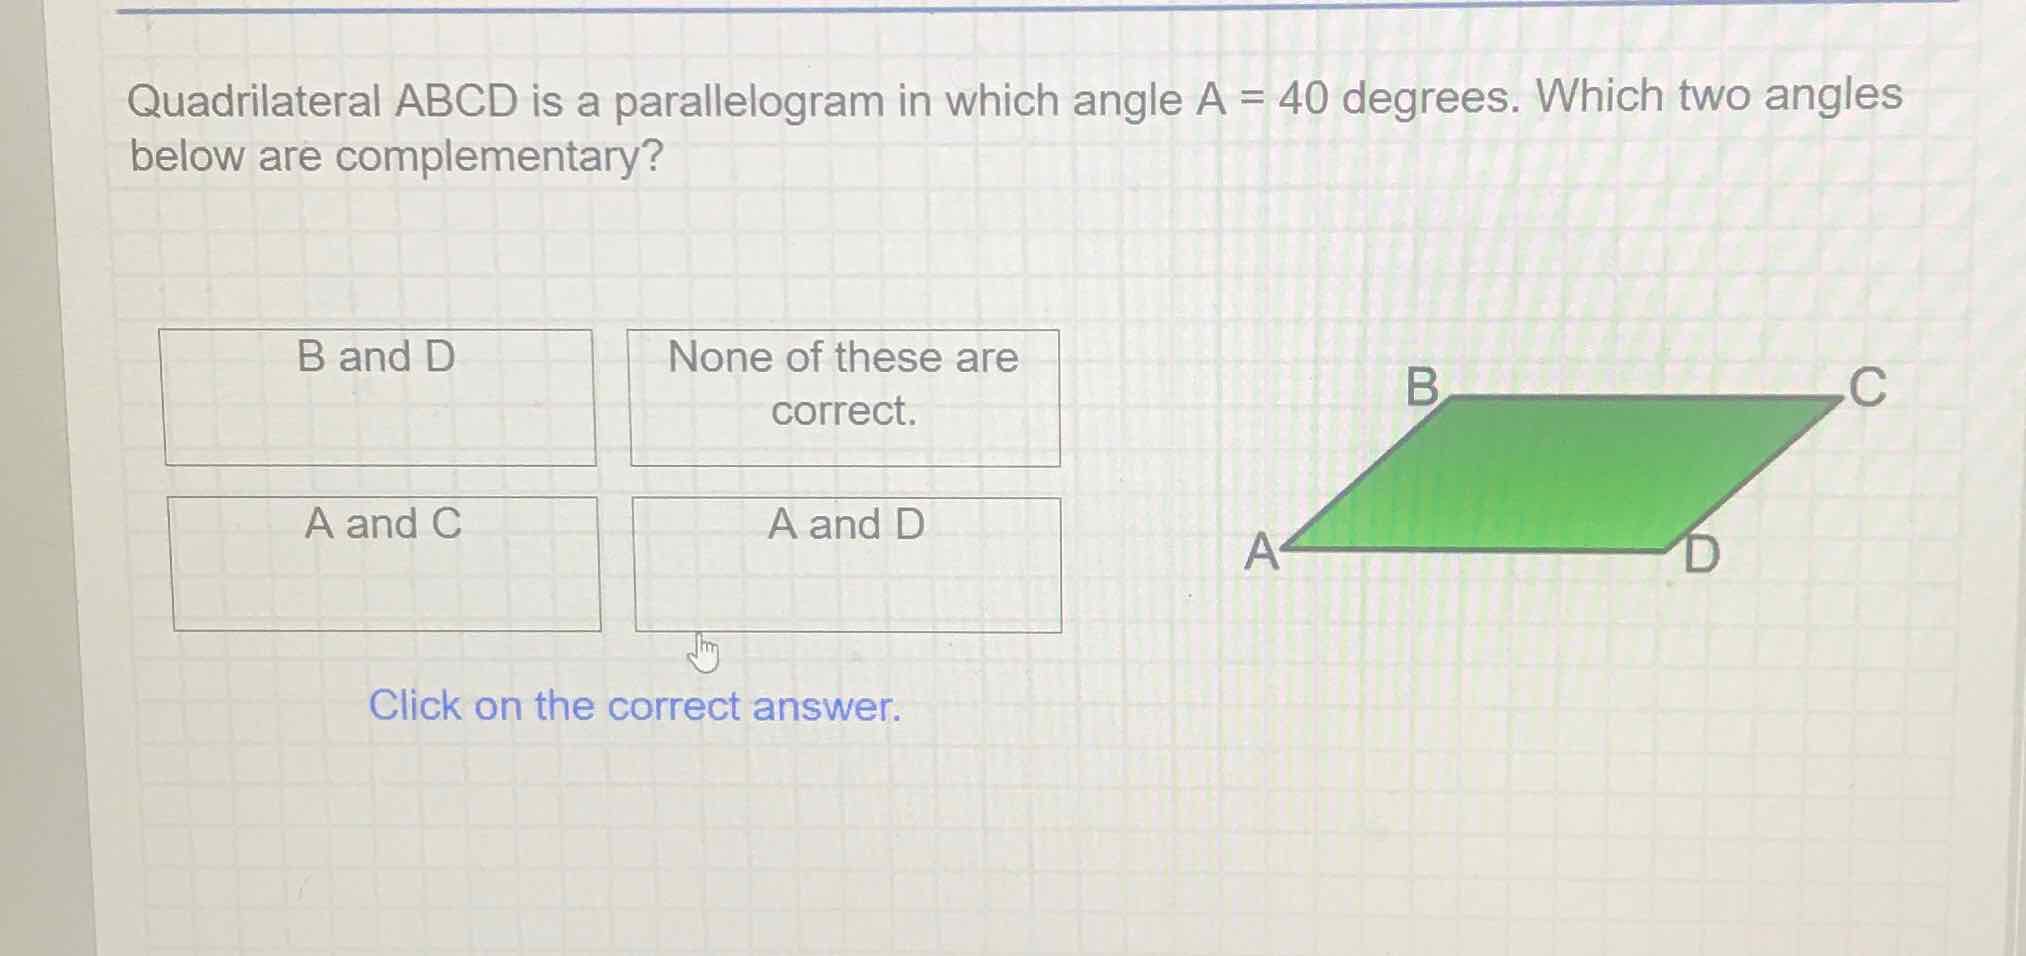 Quadrilateral \( A B C D \) is a parallelogram in which angle \( A=40 \) degrees. Which two angles below are complementary?
Click on the correct answer.